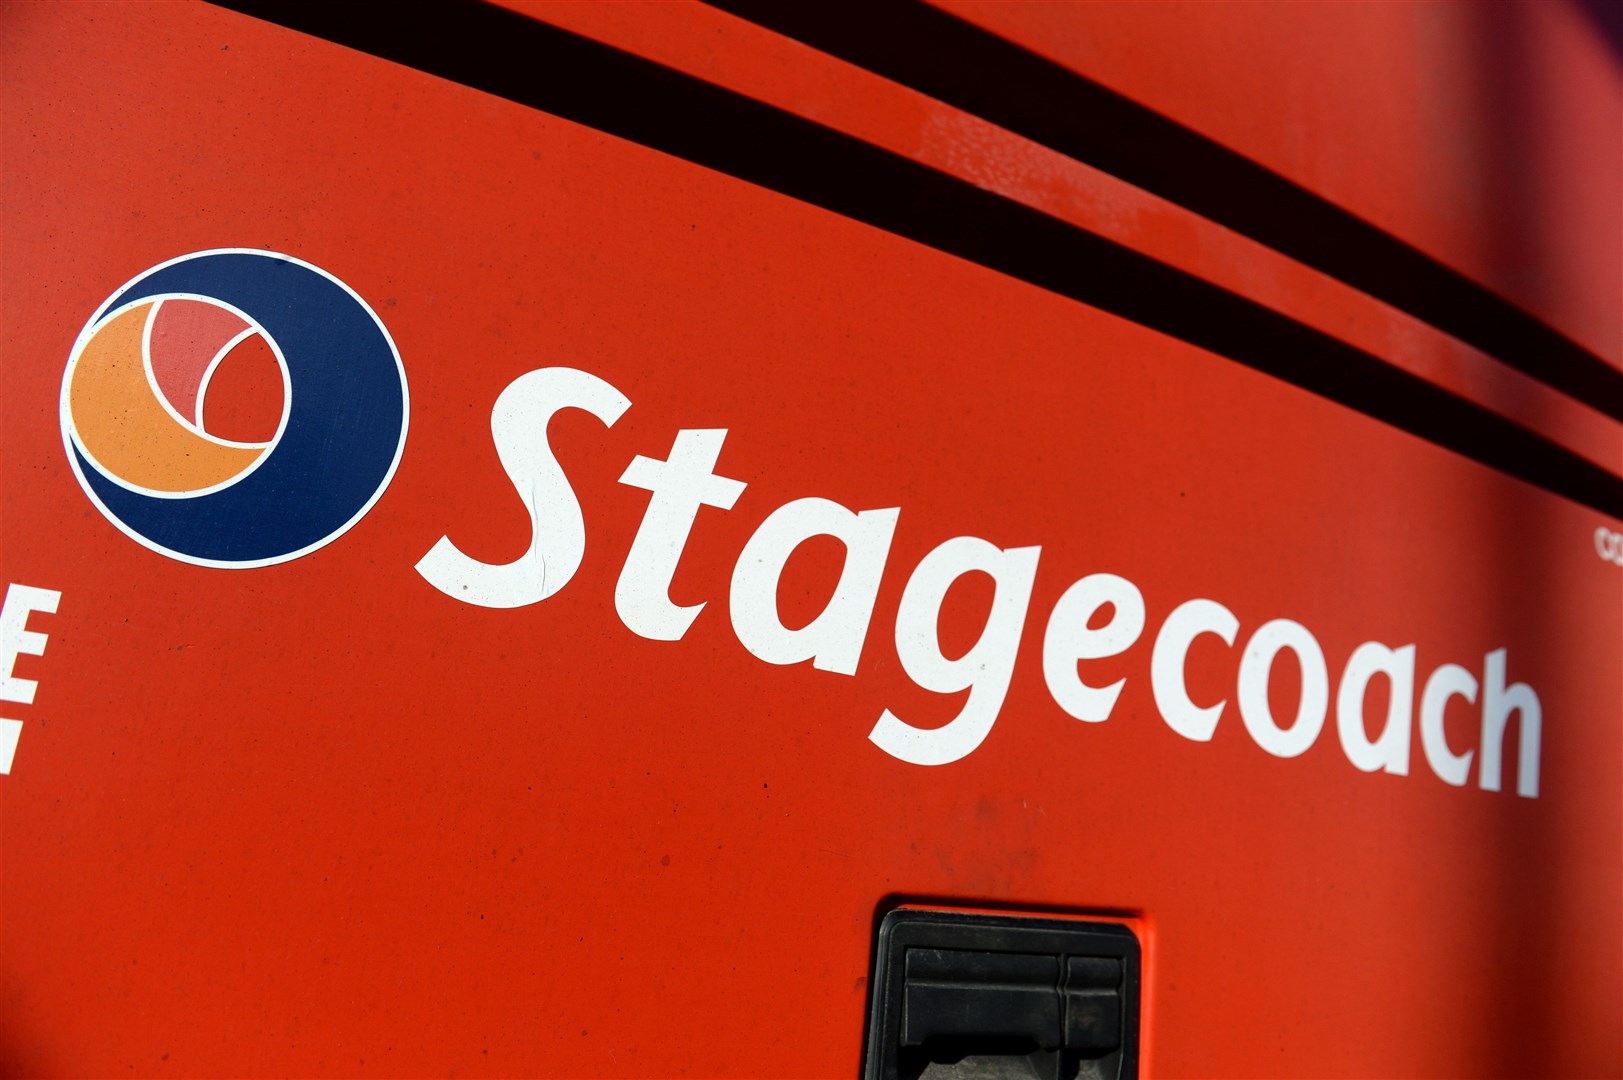 Stagecoach bus passengers are being urged to nominate their customer service stars.